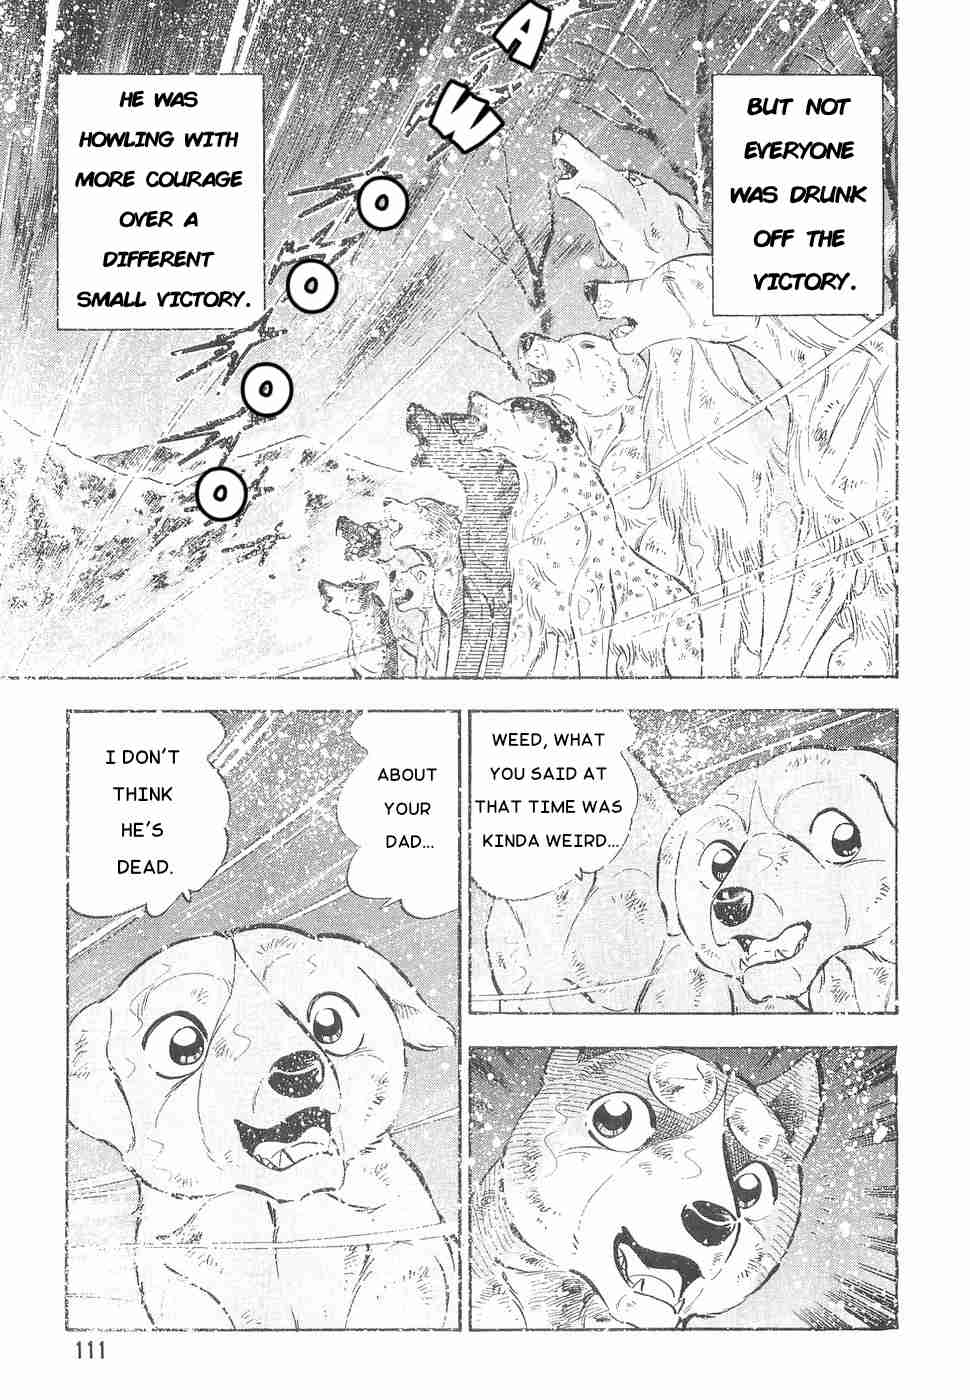 Ginga Densetsu Weed Vol. 19 Ch. 168 A Cry Of Victory